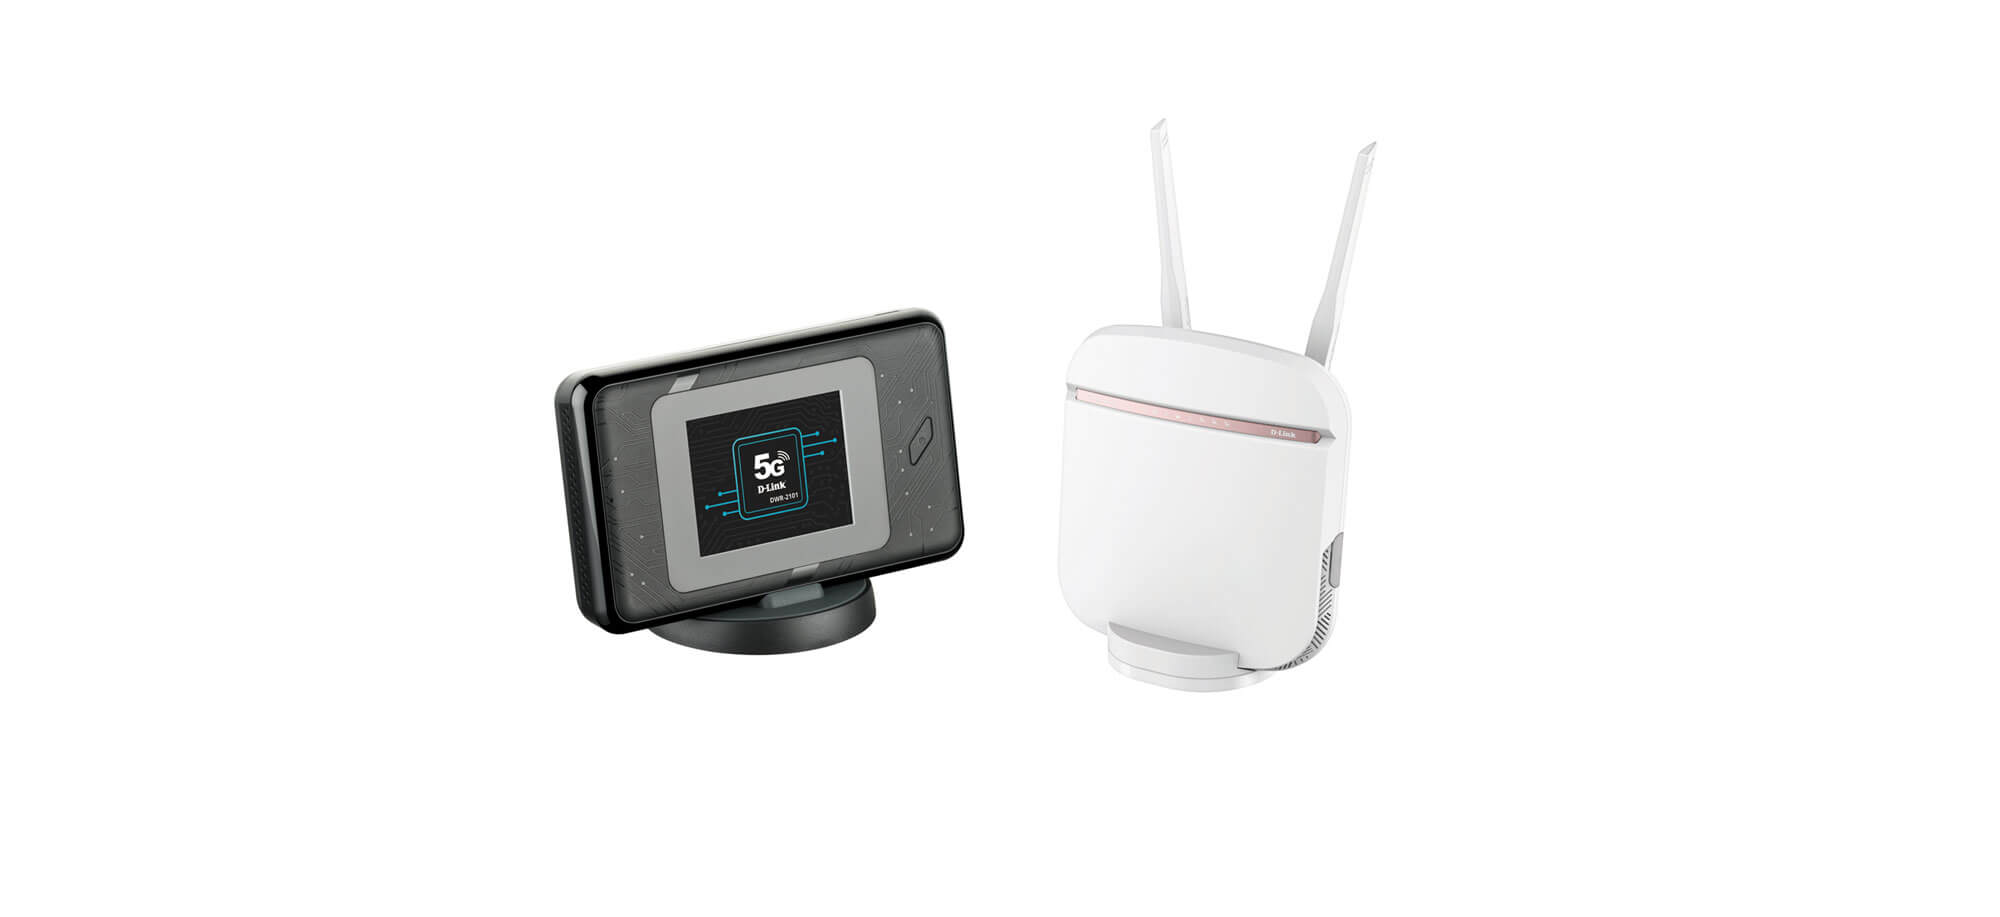 D-Link breaks ground of 5G portfolio with new Mobile Hotspot and Wi-Fi  Router